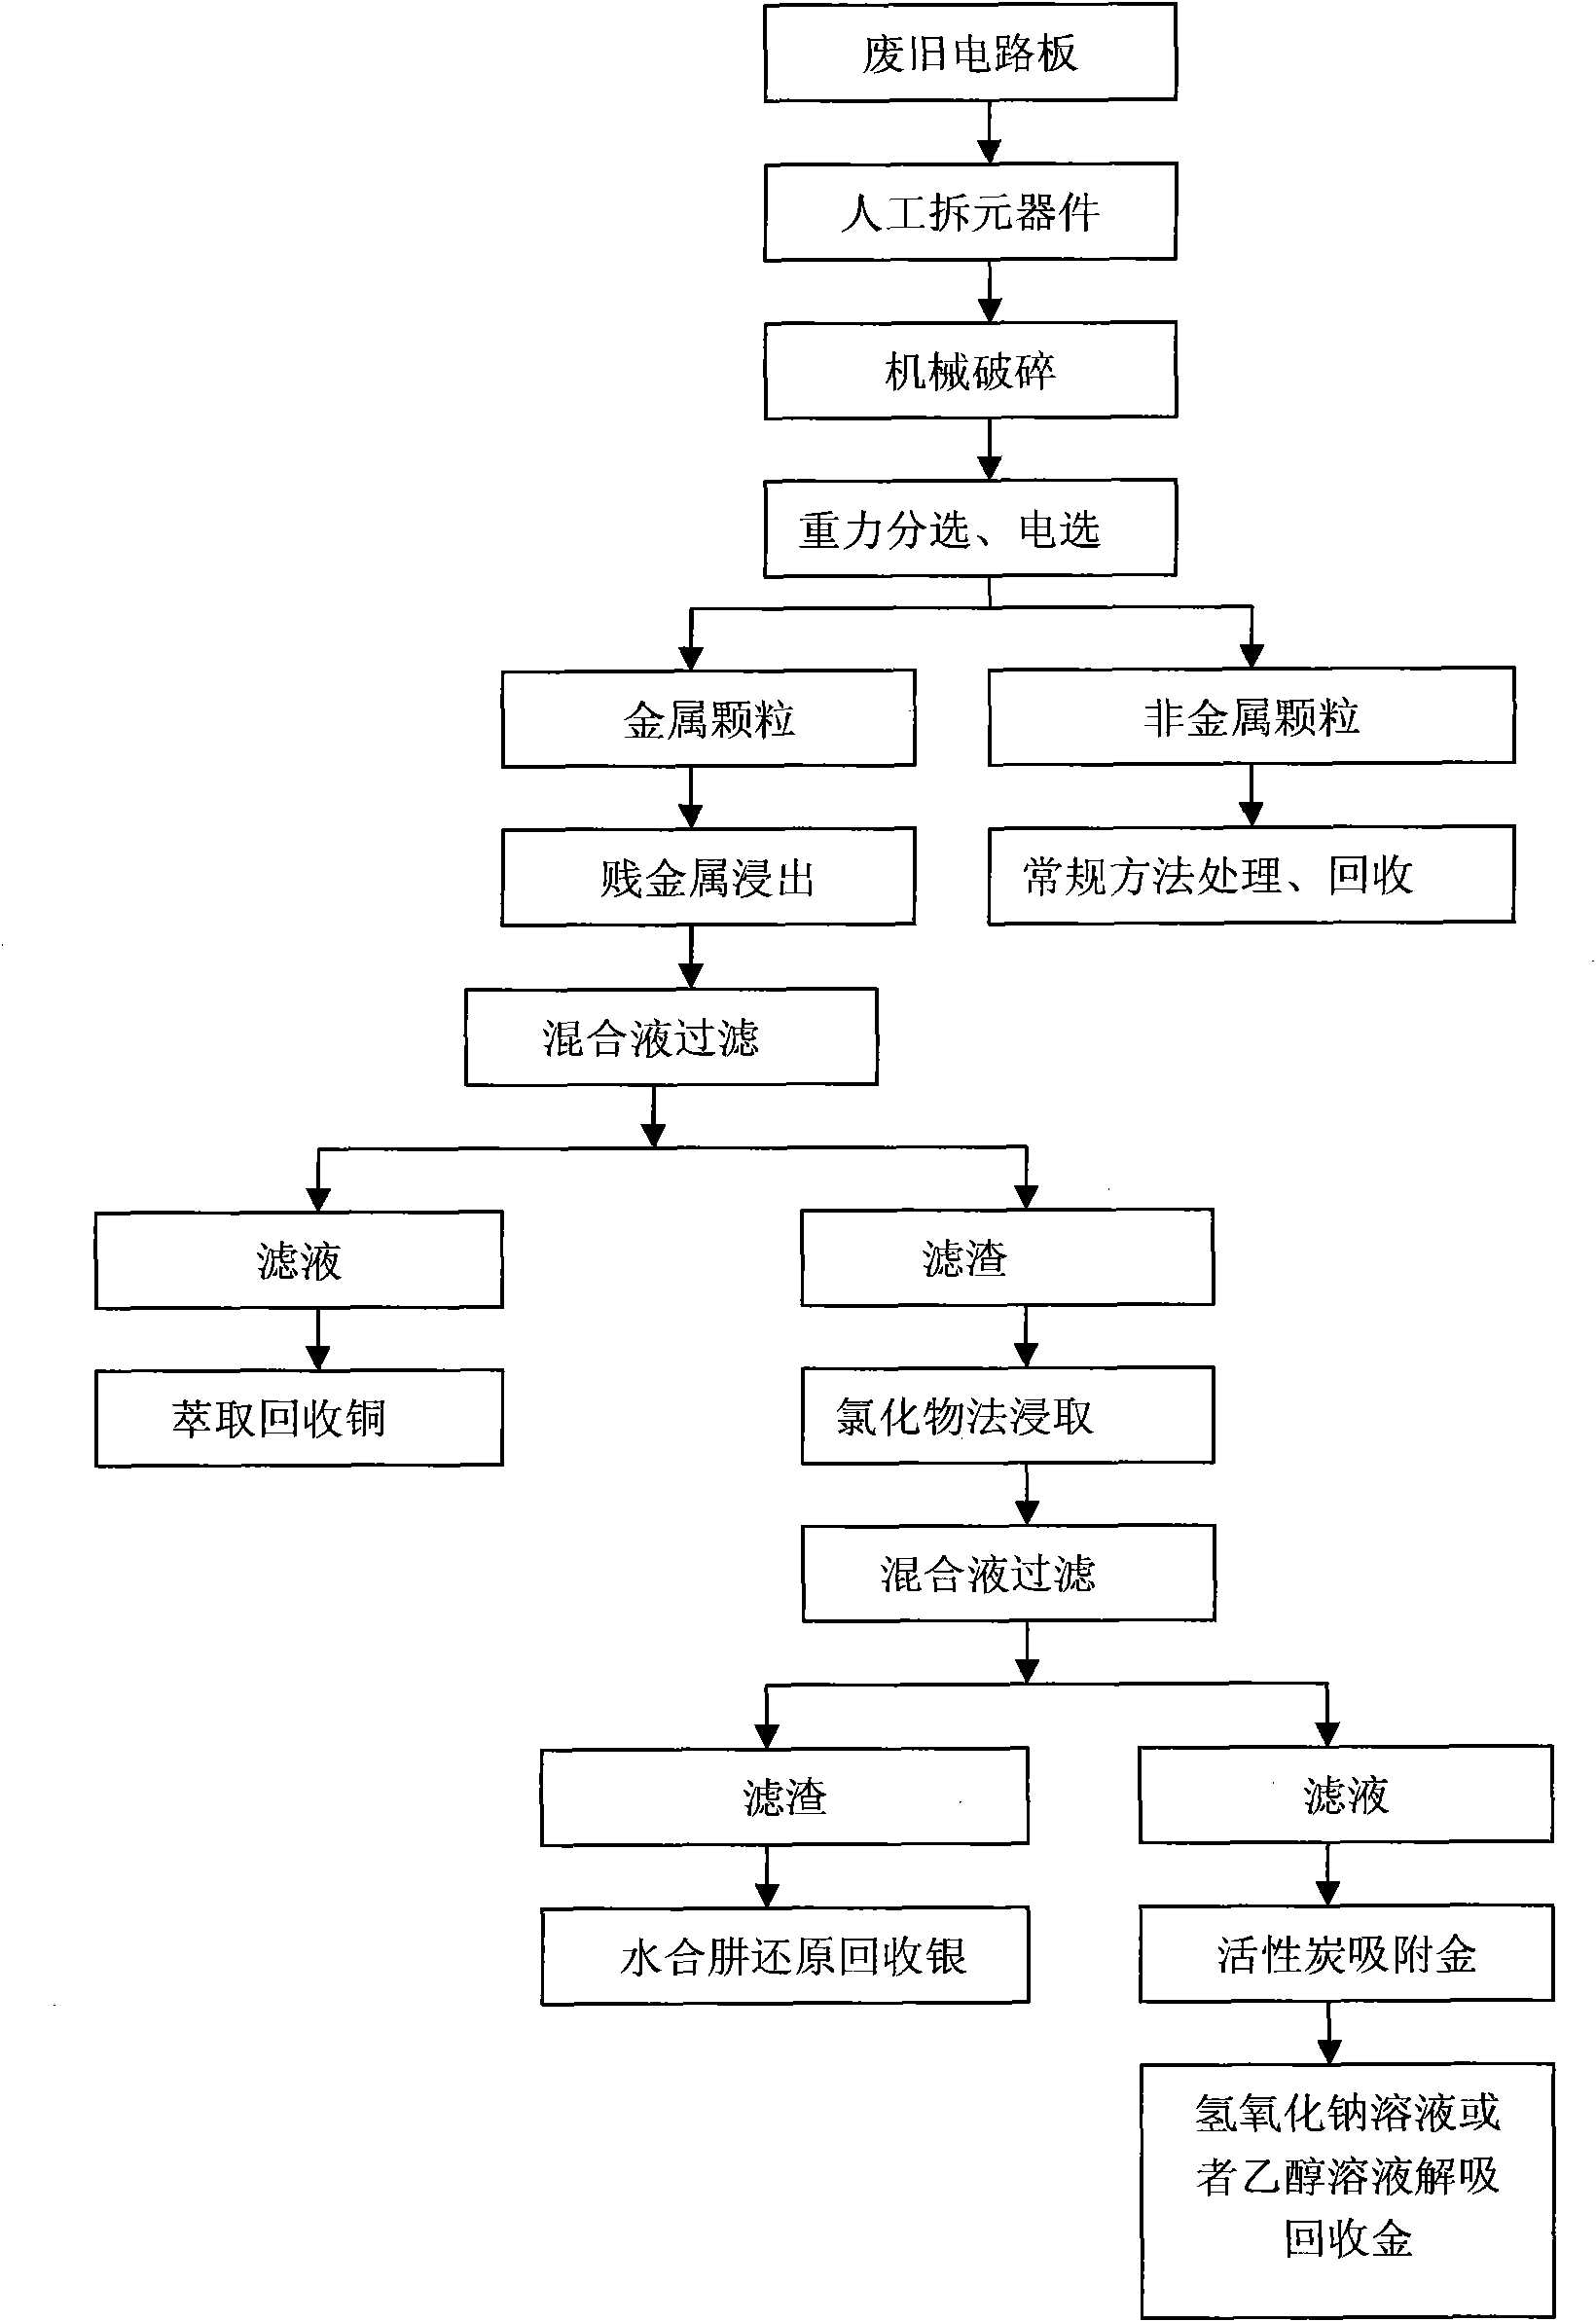 Method for recovering gold and silver from waste circuit boards